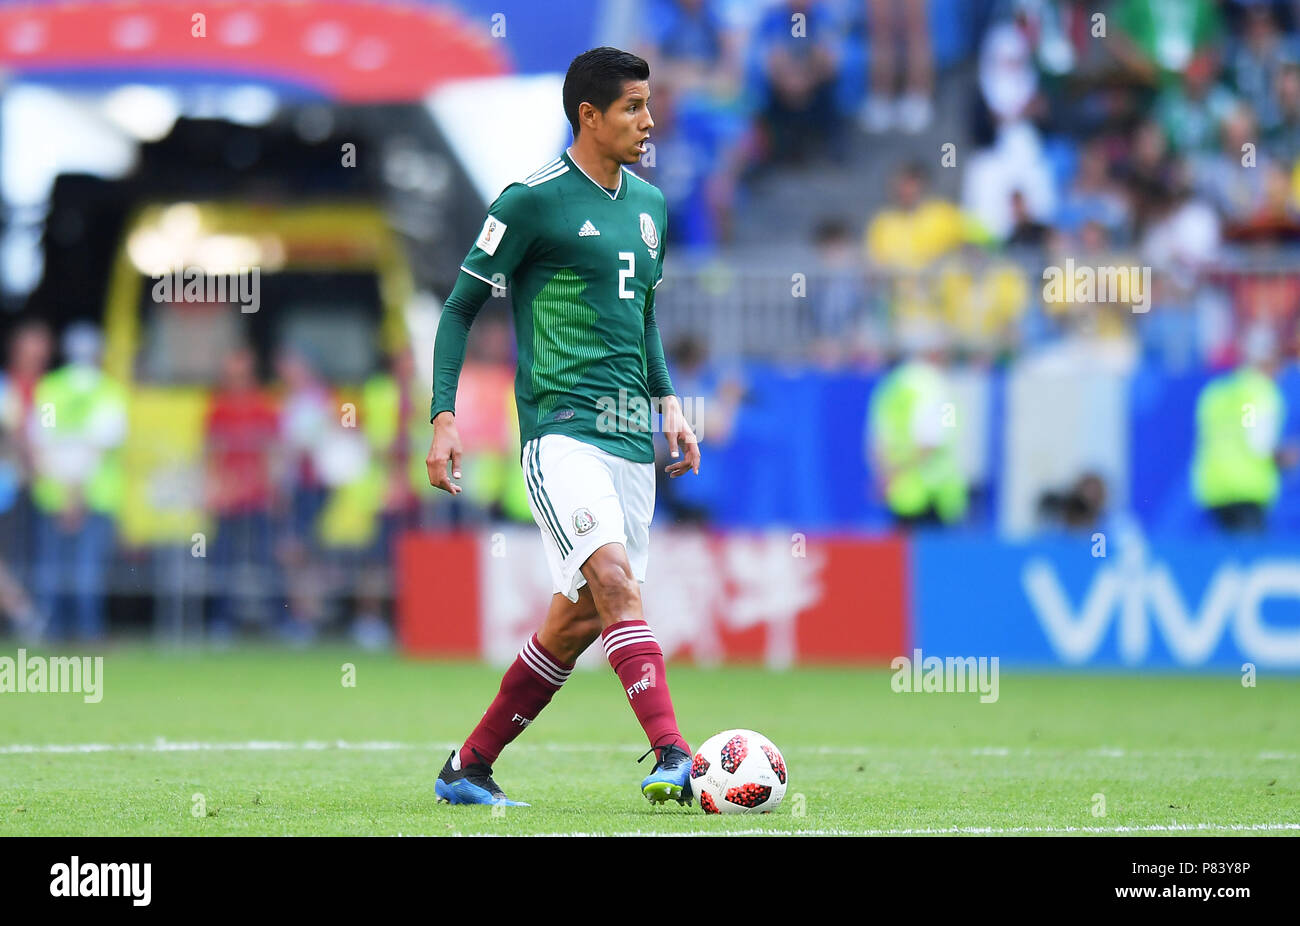 SAMARA, RUSSIA - JULY 02: Hugo Ayala of Mexico in action during the 2018 FIFA World Cup Russia Round of 16 match between Brazil and Mexico at Samara Arena on July 2, 2018 in Samara, Russia. (Photo by Lukasz Laskowski/PressFocus/MB Media) Stock Photo